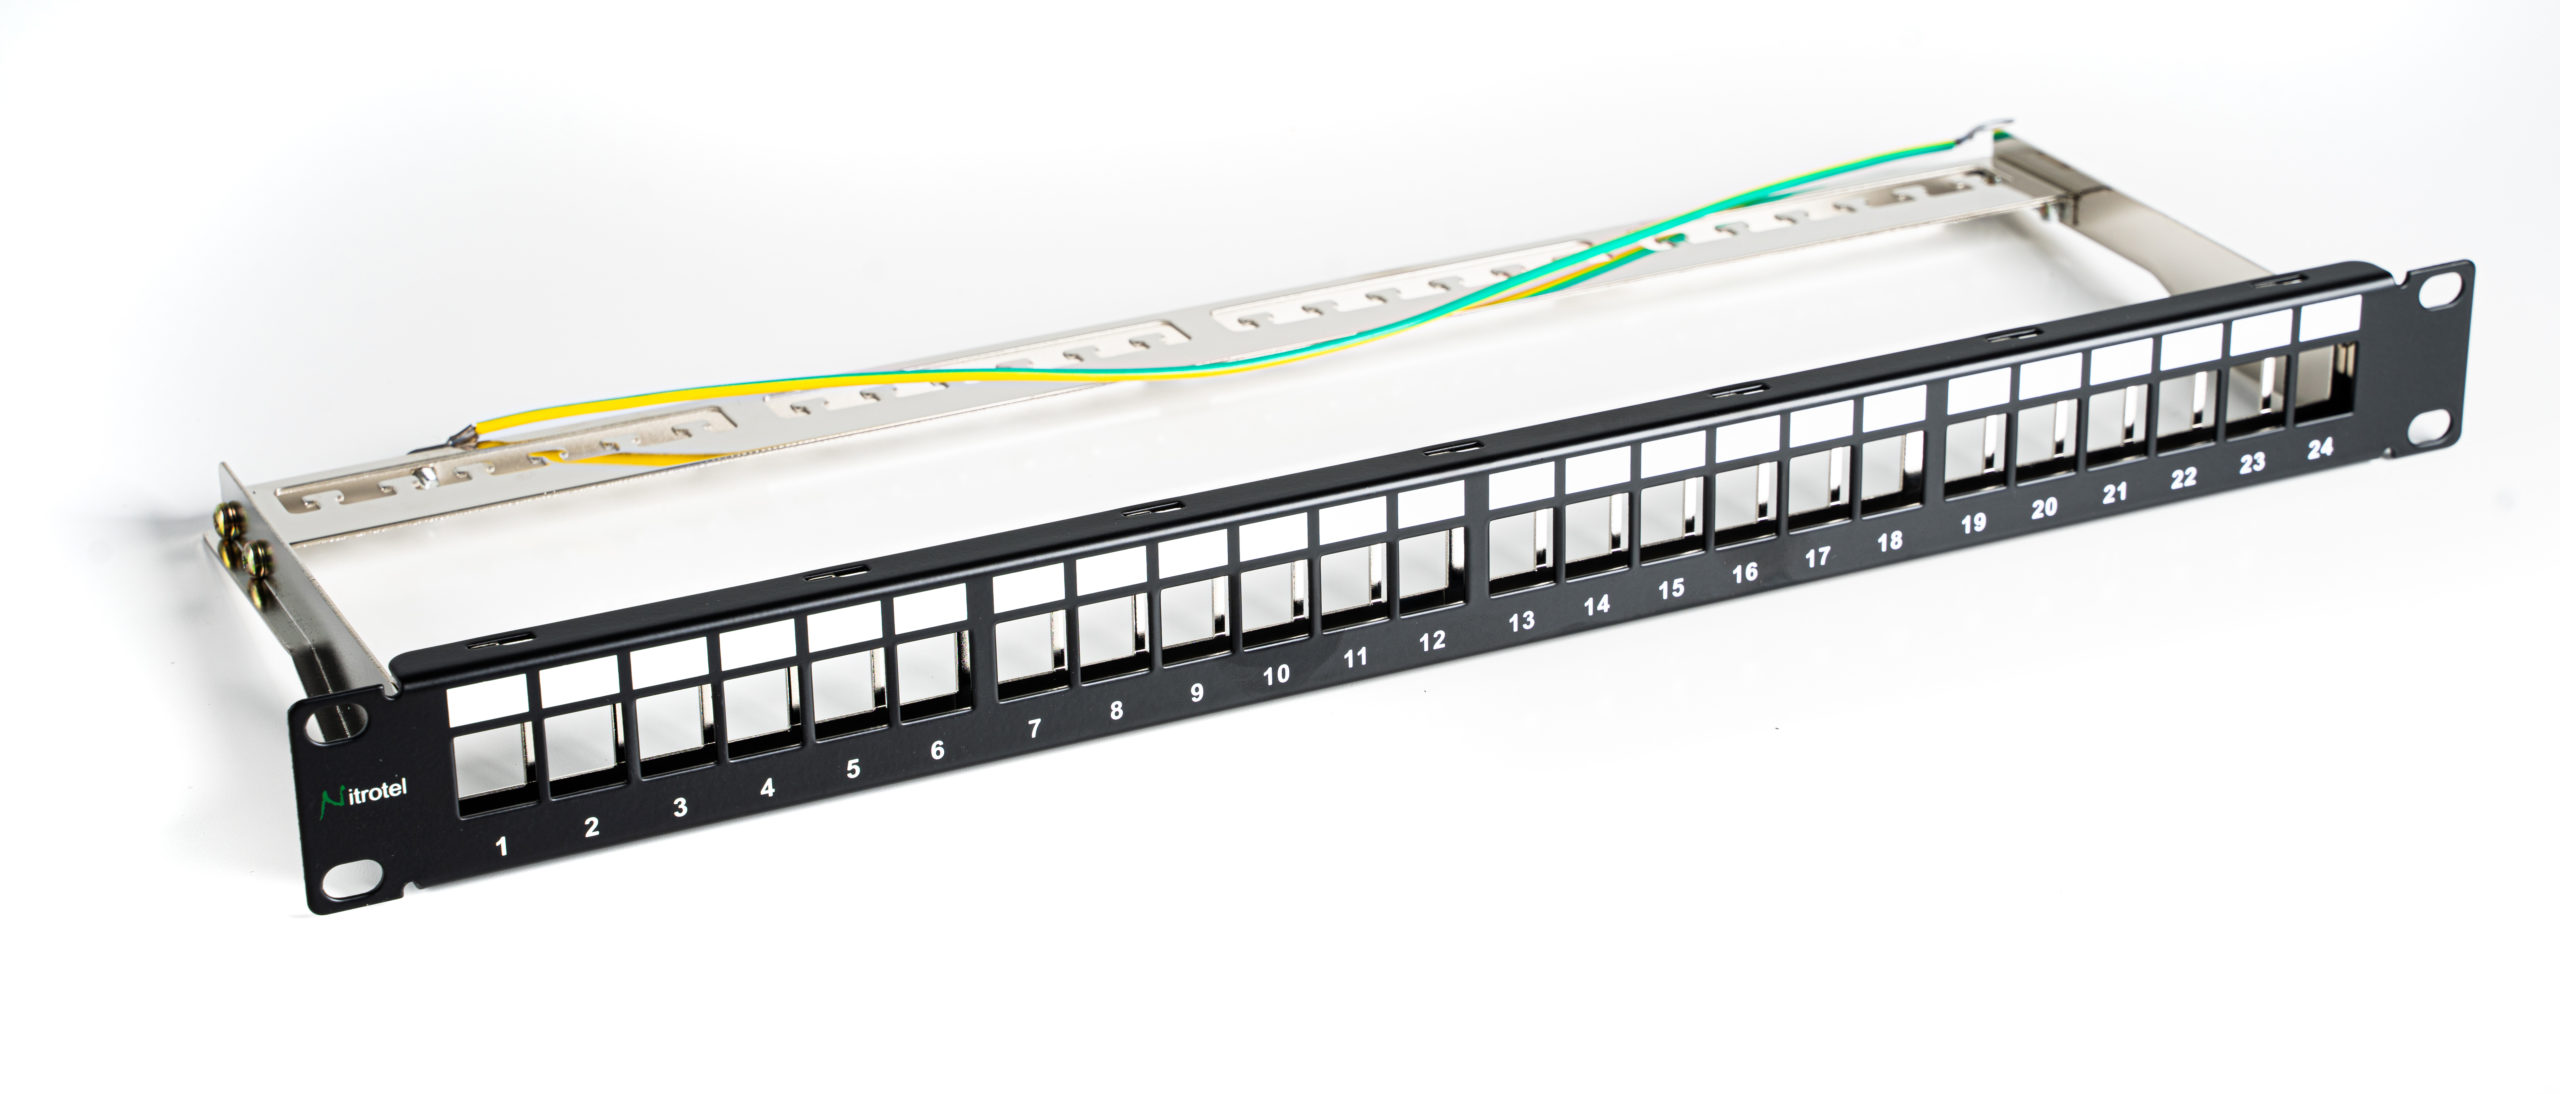 ShoreTel 24 Port Patch Panel with Amphenol Cable